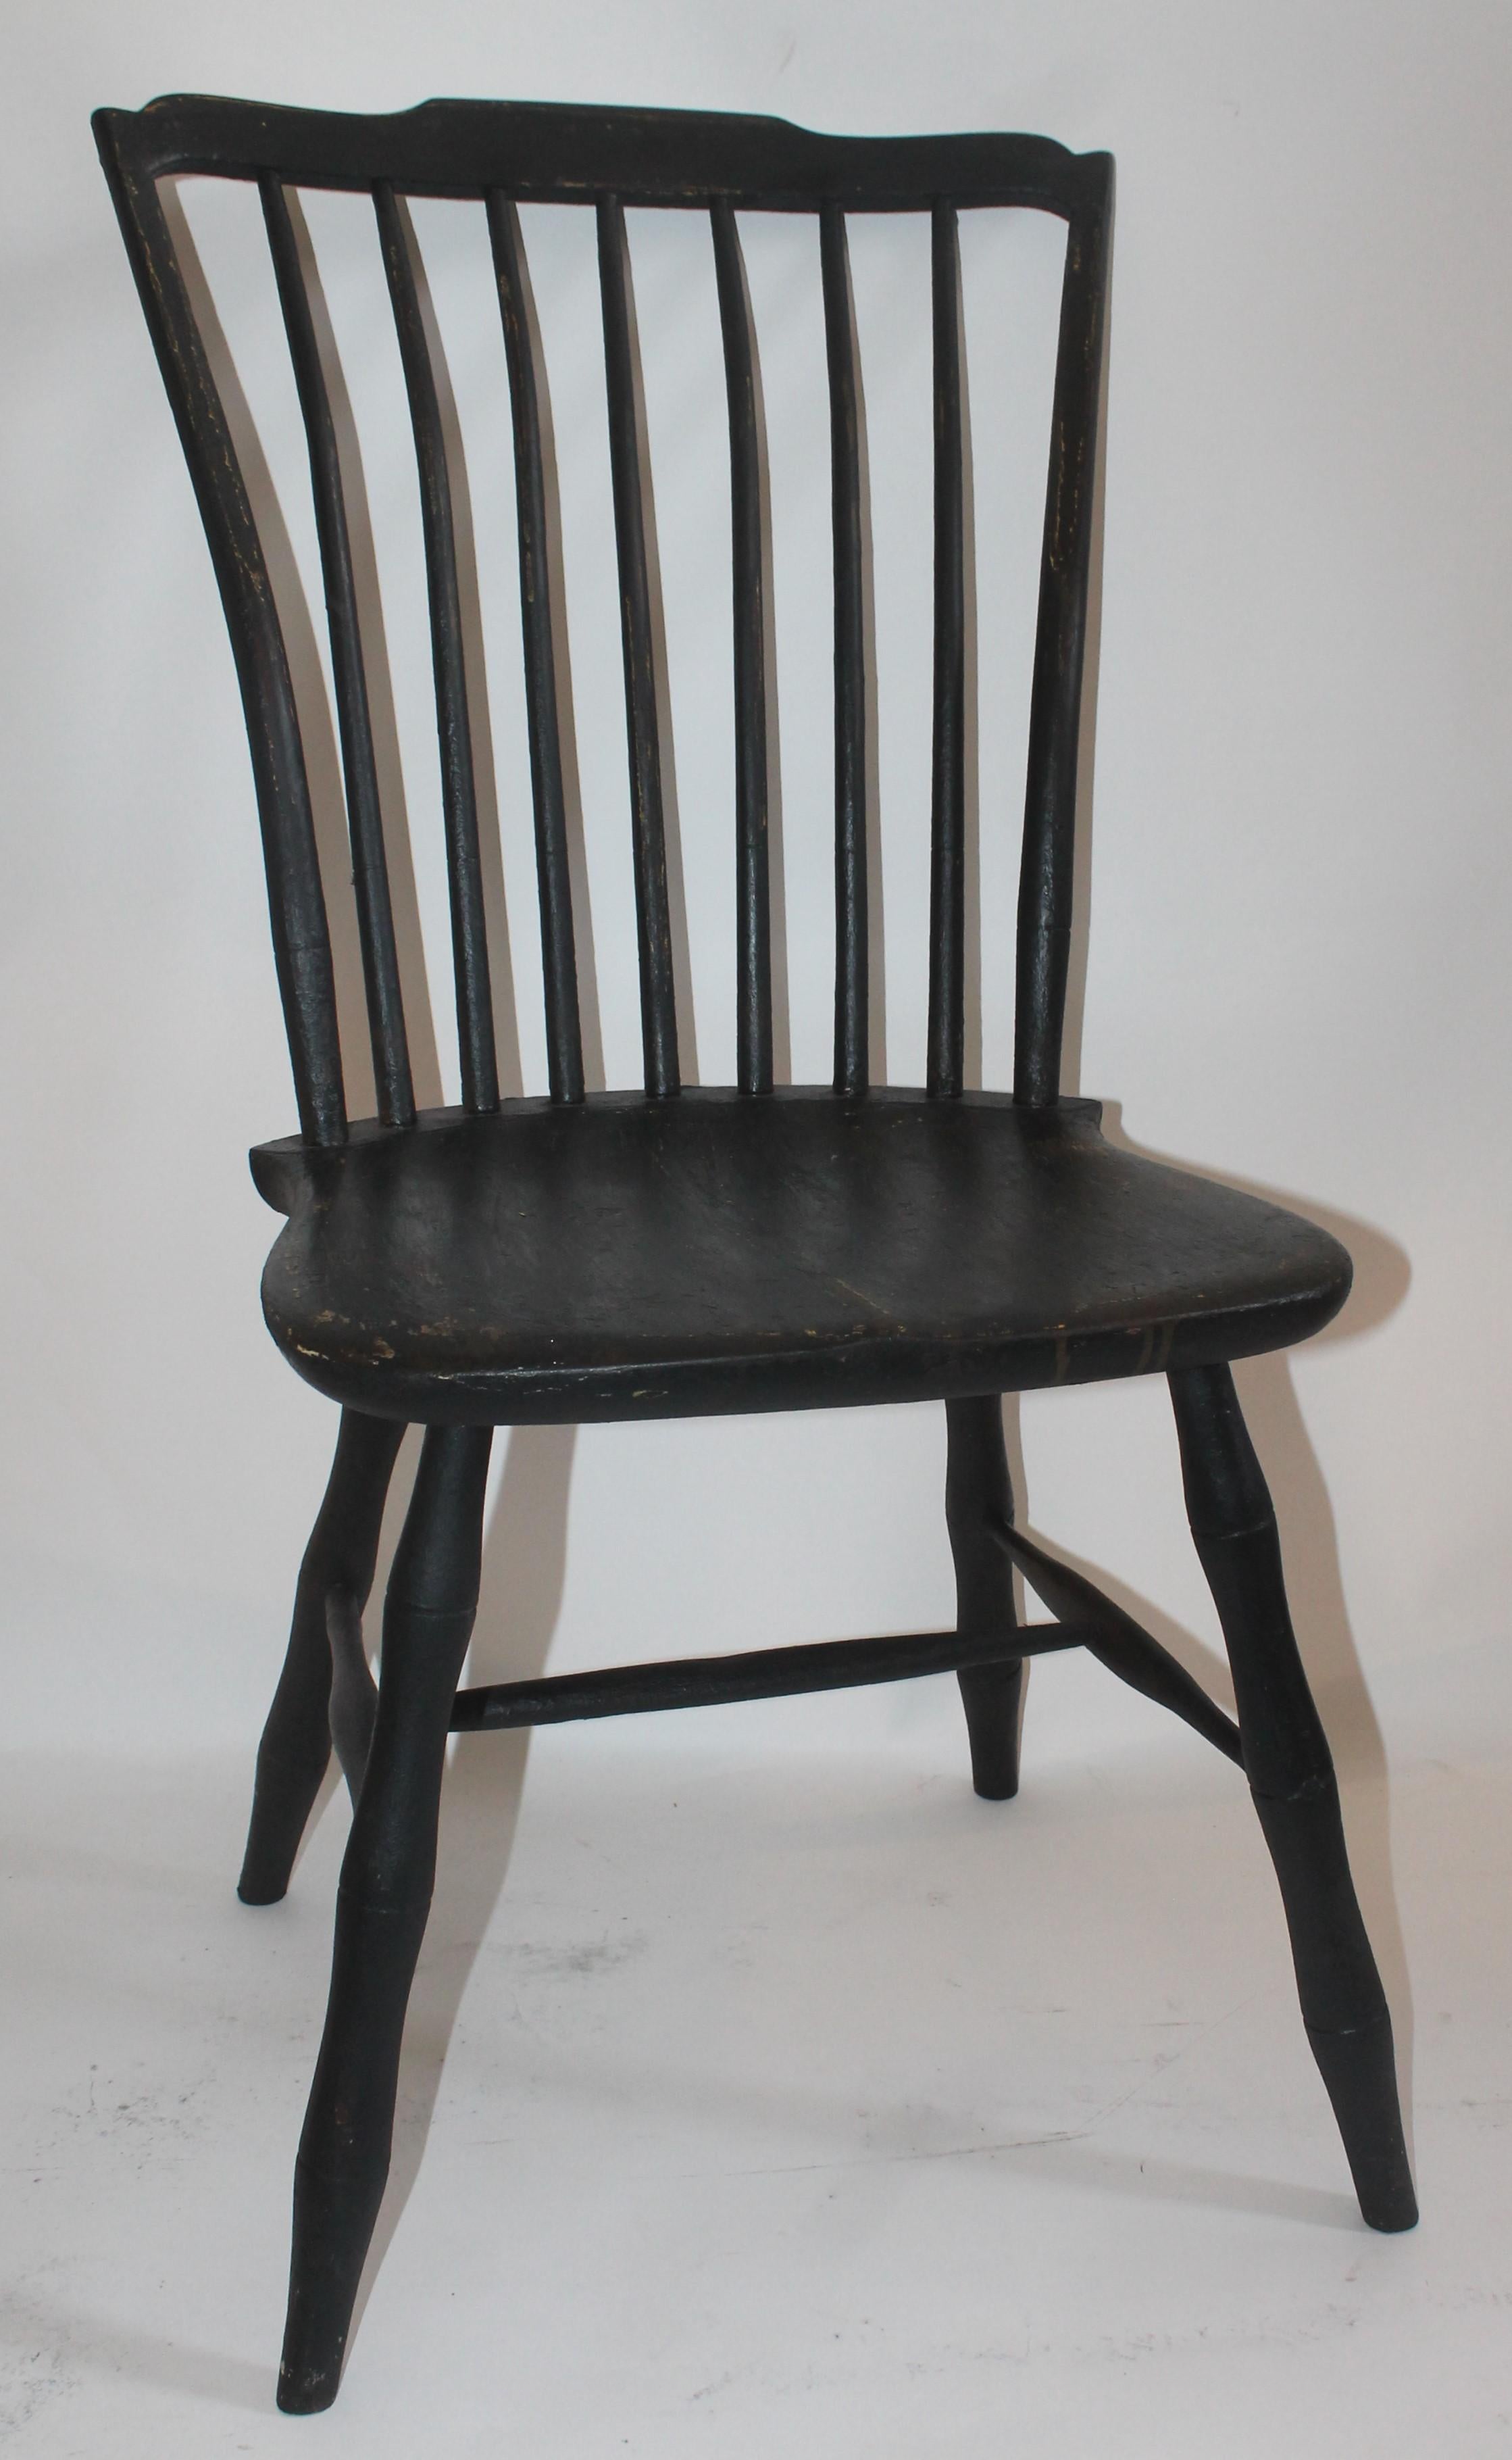 Country 19th Century Pair of Black Painted Windsor Chairs